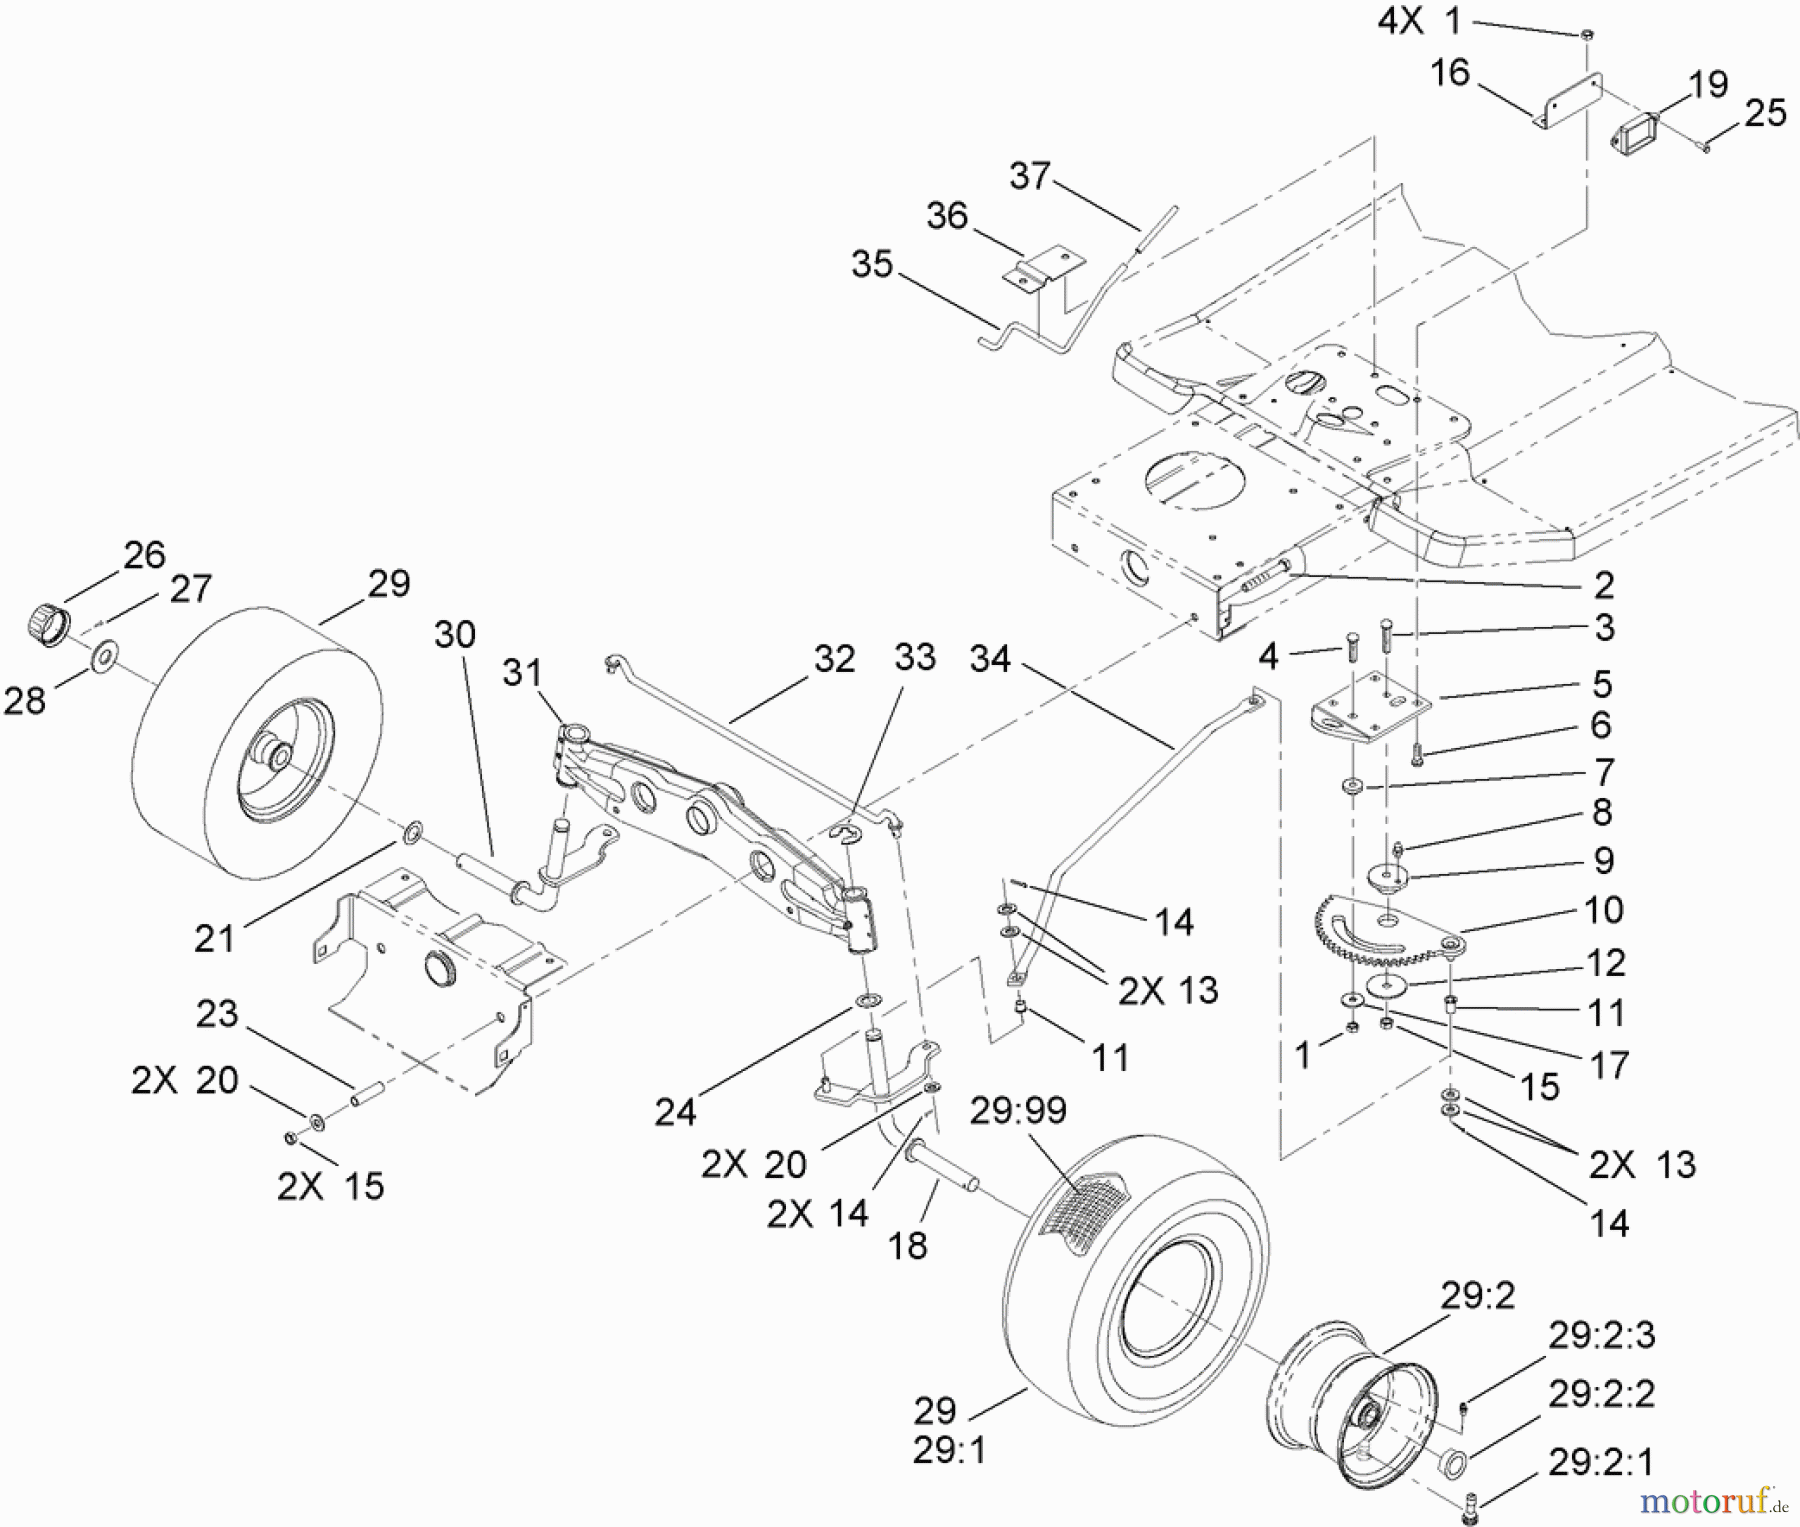  Toro Neu Mowers, Lawn & Garden Tractor Seite 1 71257 (XL 320) - Toro XL 320 Lawn Tractor, 2009 (290000001-290999999) STEERING COMPONENT ASSEMBLY